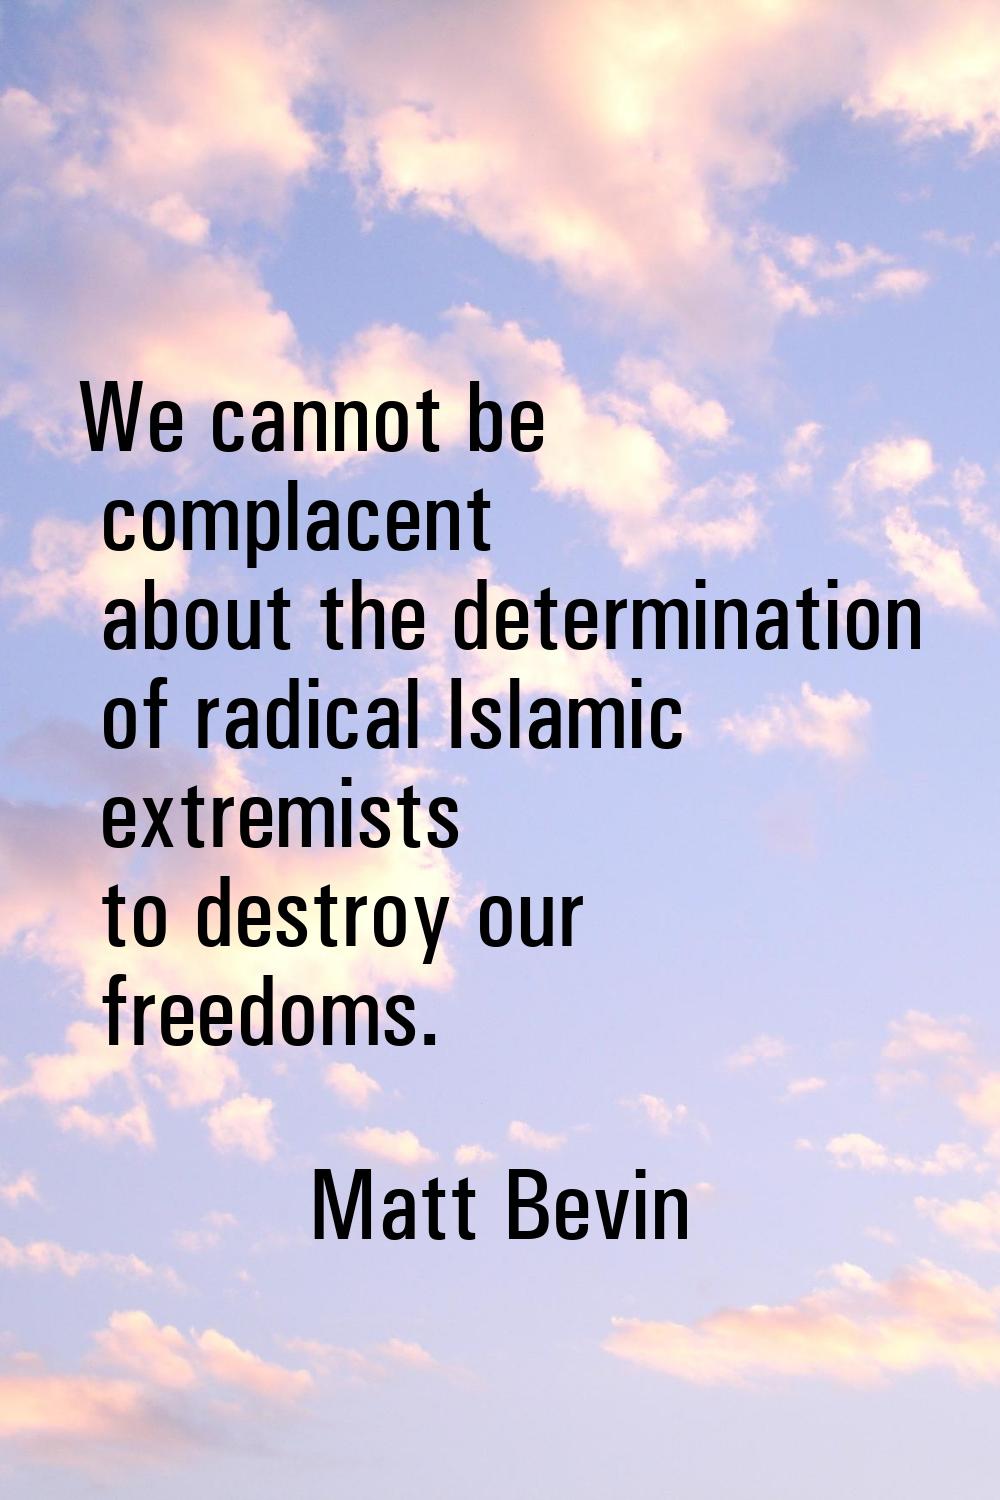 We cannot be complacent about the determination of radical Islamic extremists to destroy our freedo